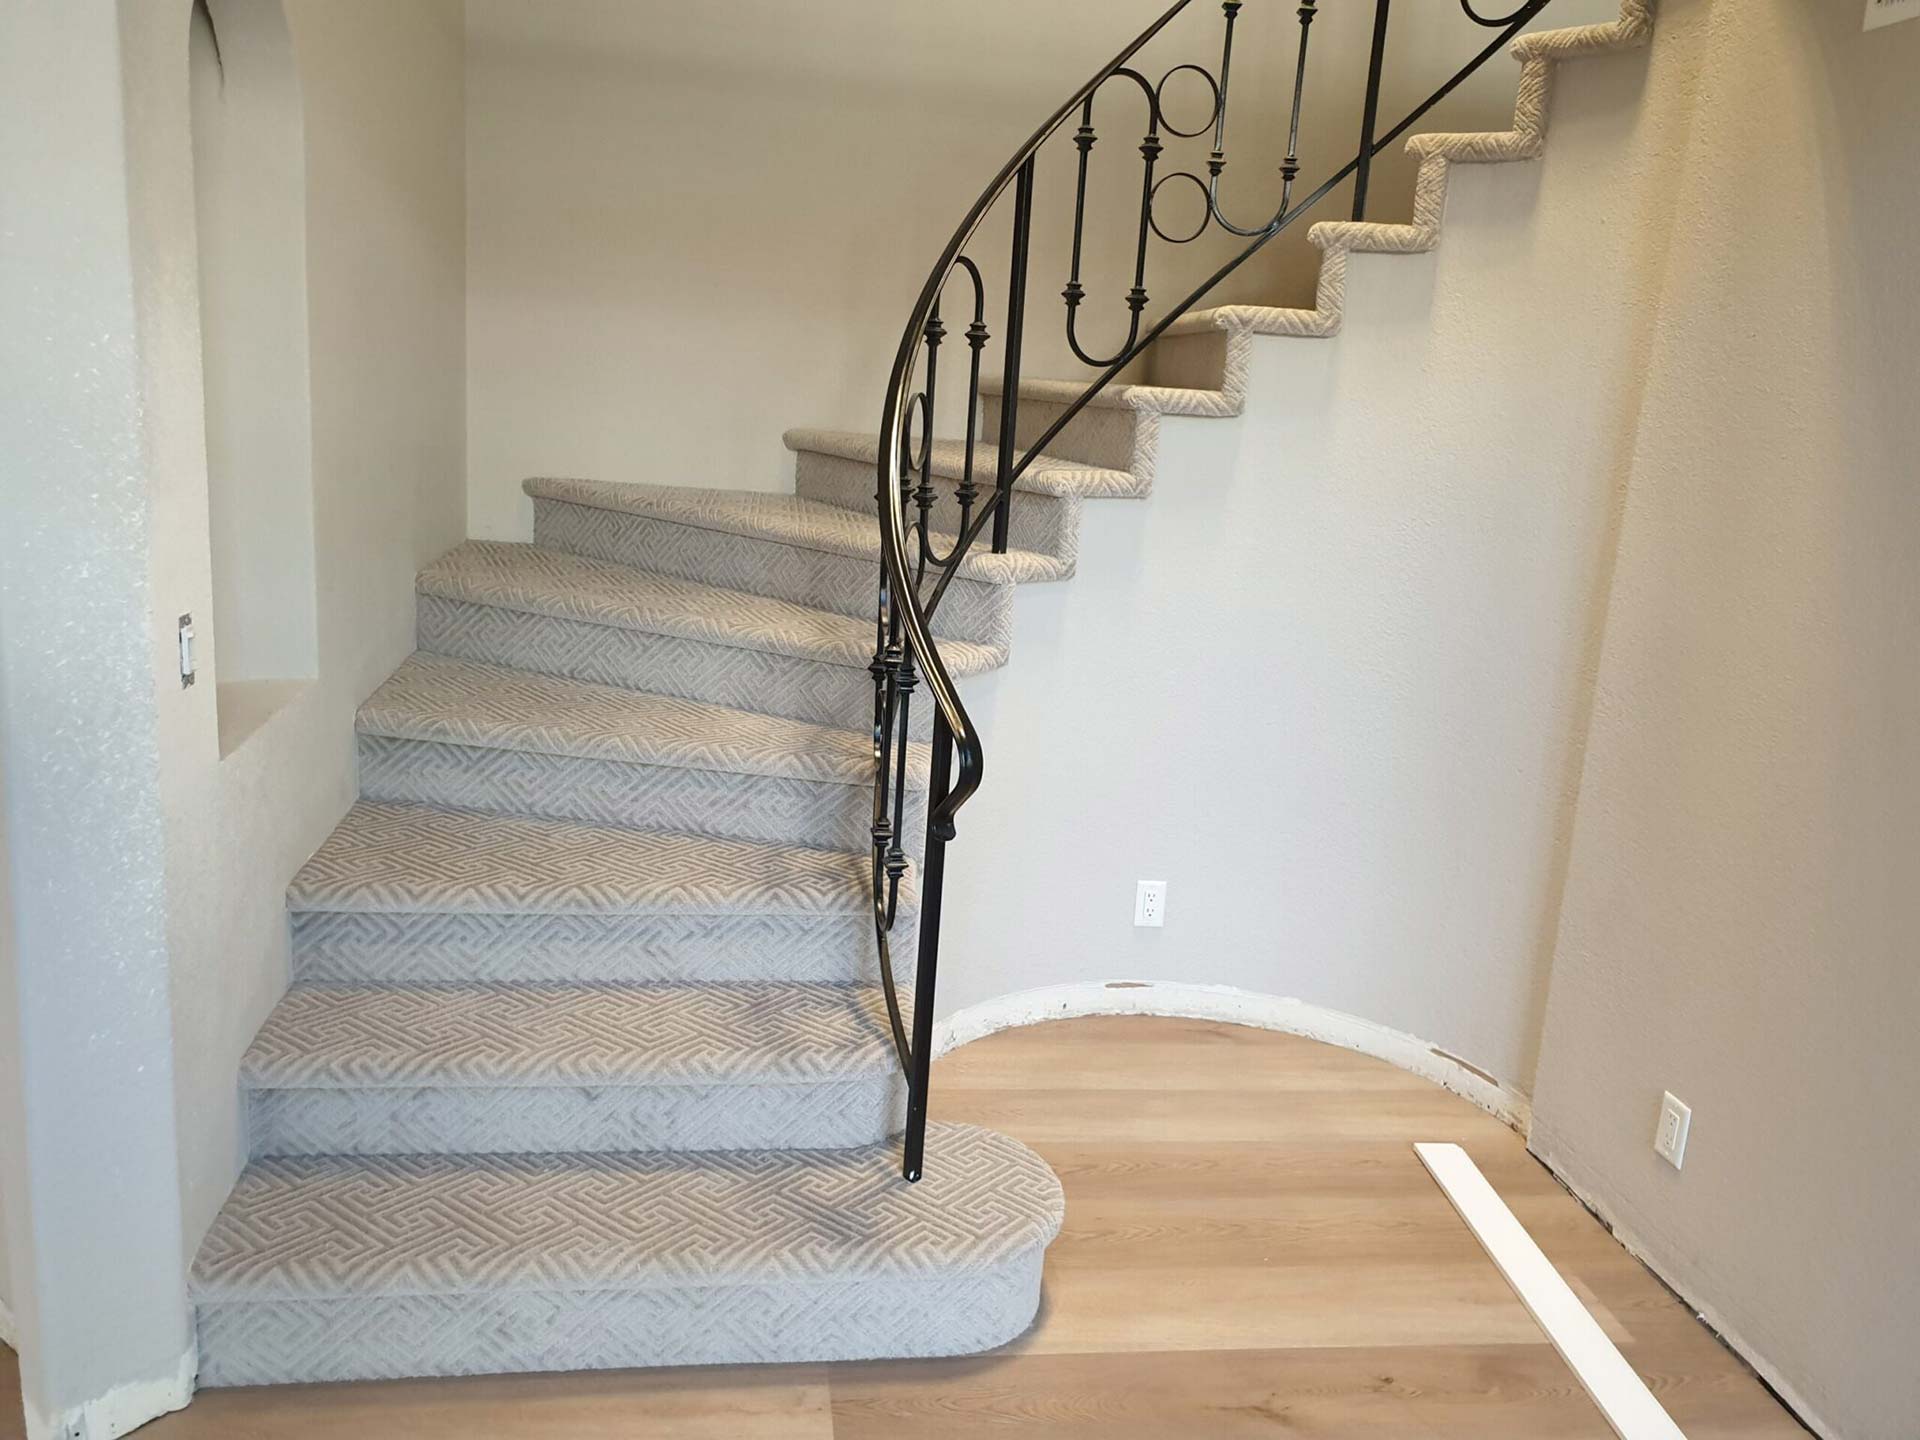 Carpet Flooring on Stairs in Mountain View Home